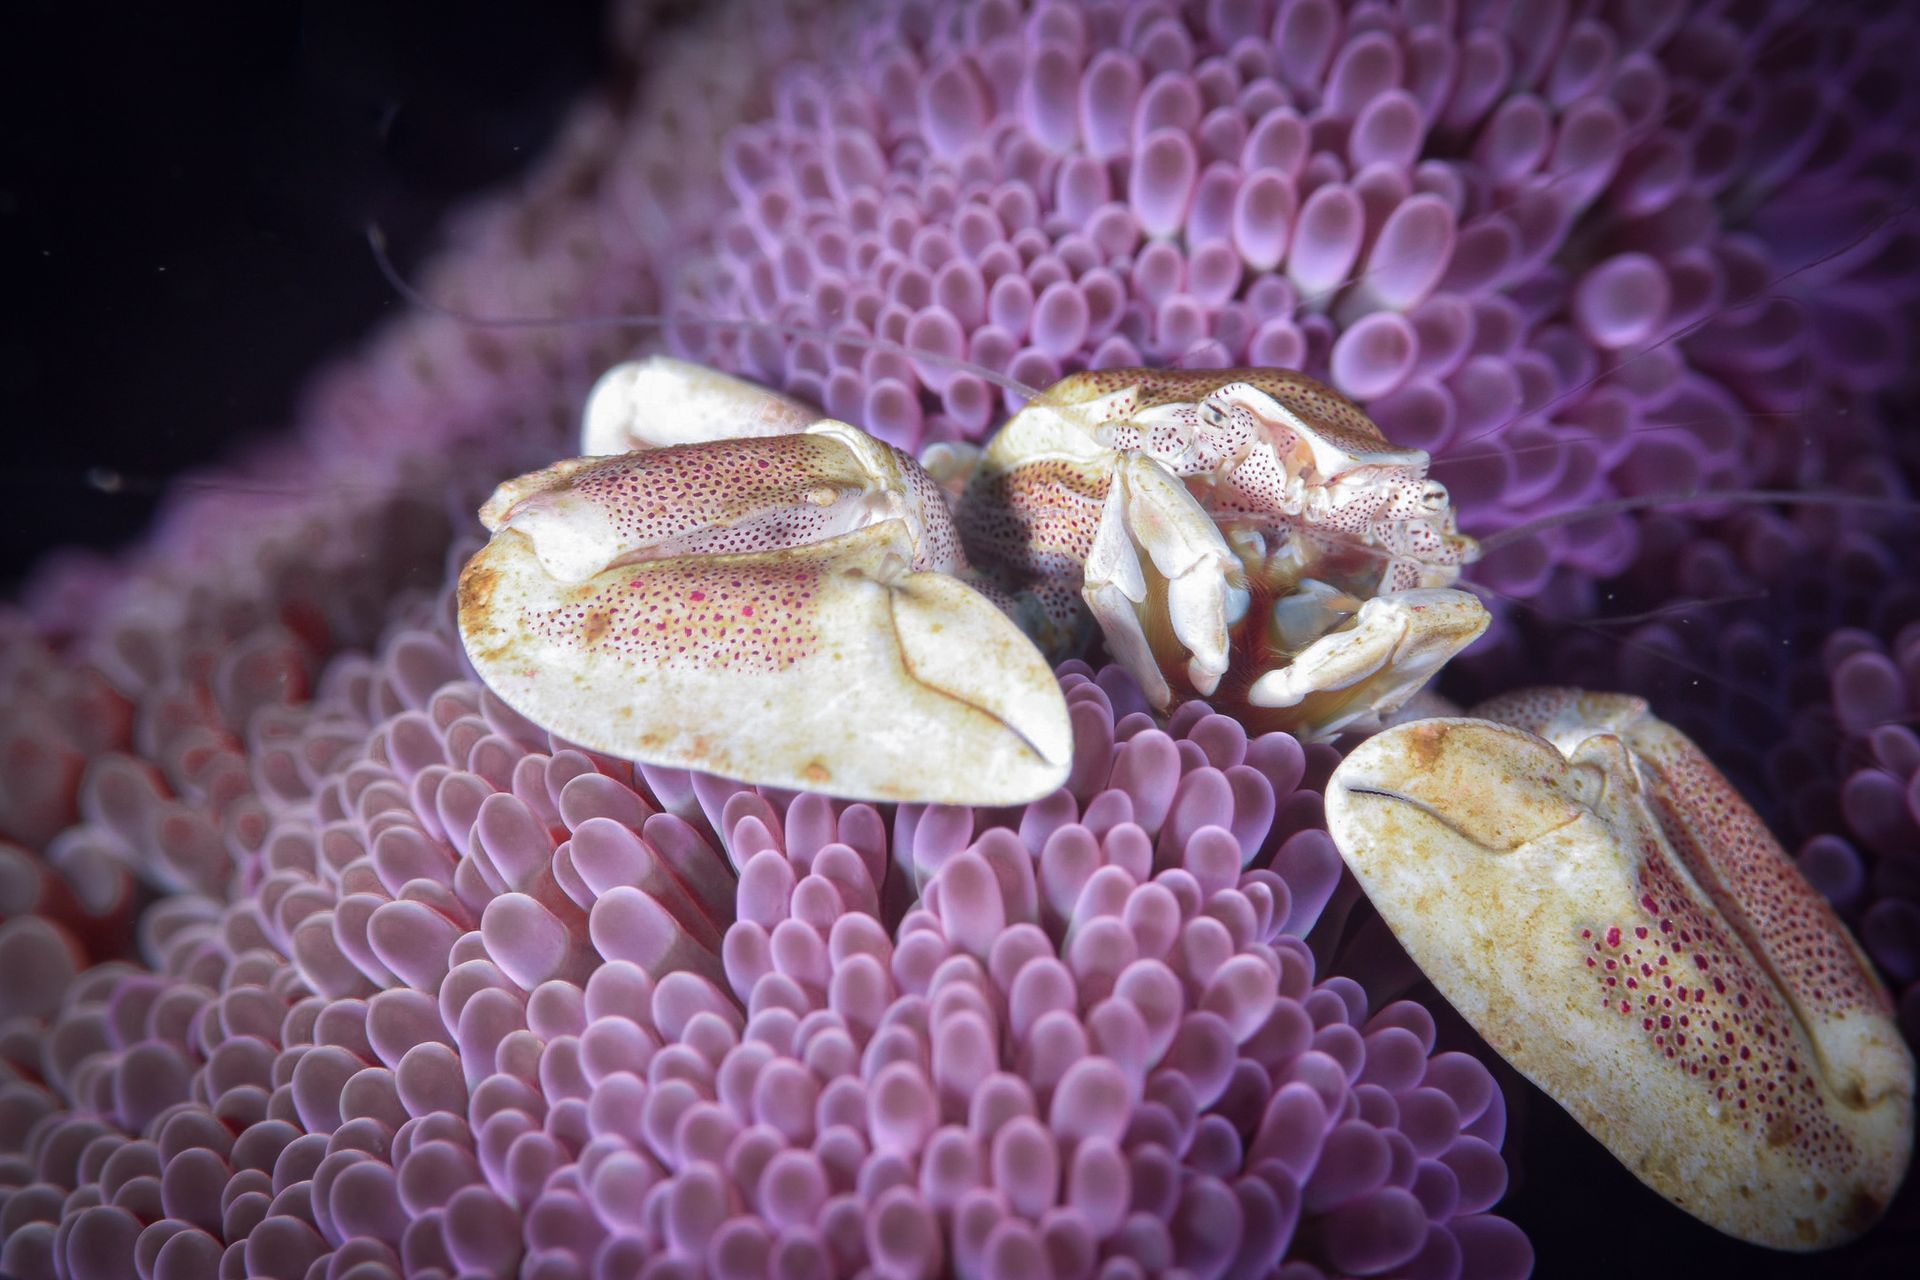 A white porcelain crab with its largest front claws flexed for attack sits amid a purple anemone taken on a Fiji underwater photography workshop